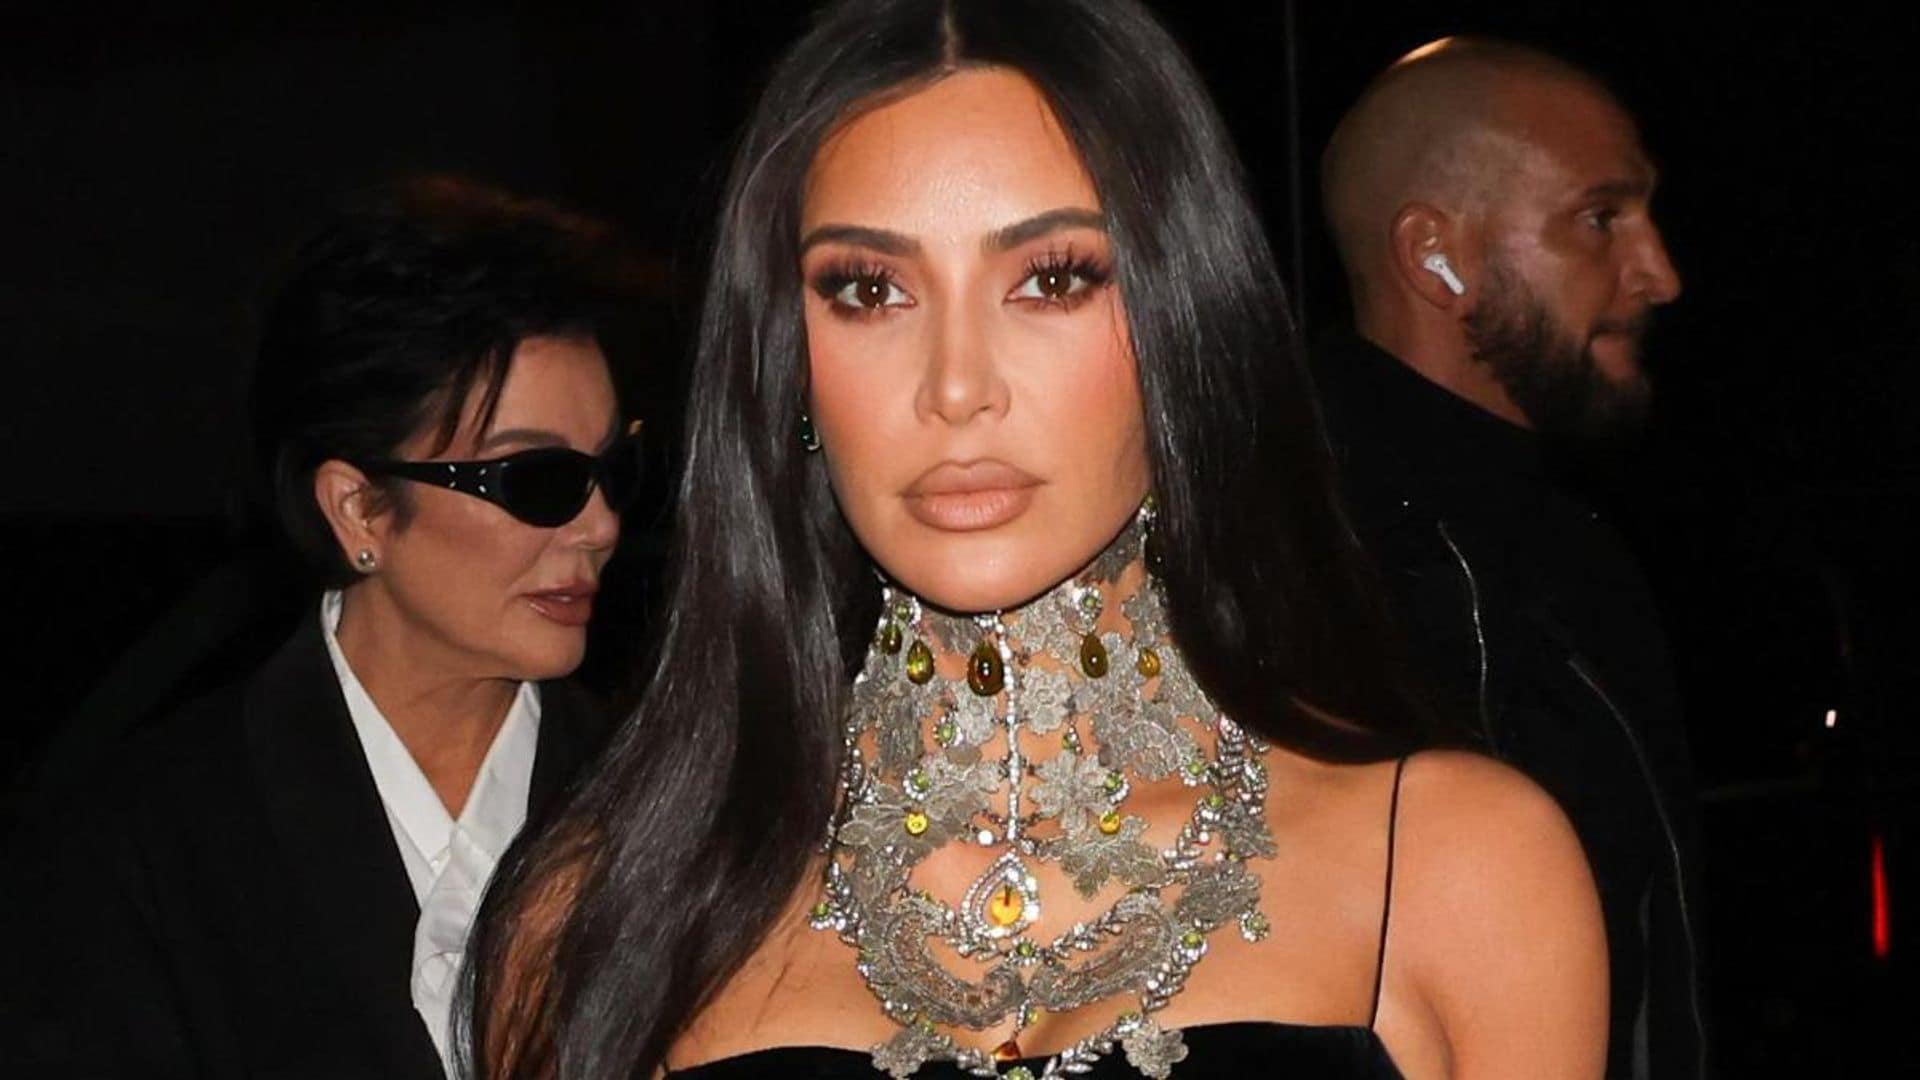 Kim Kardashian describes the perfect man if she decides to marry again: ‘I know what a real relationship is’